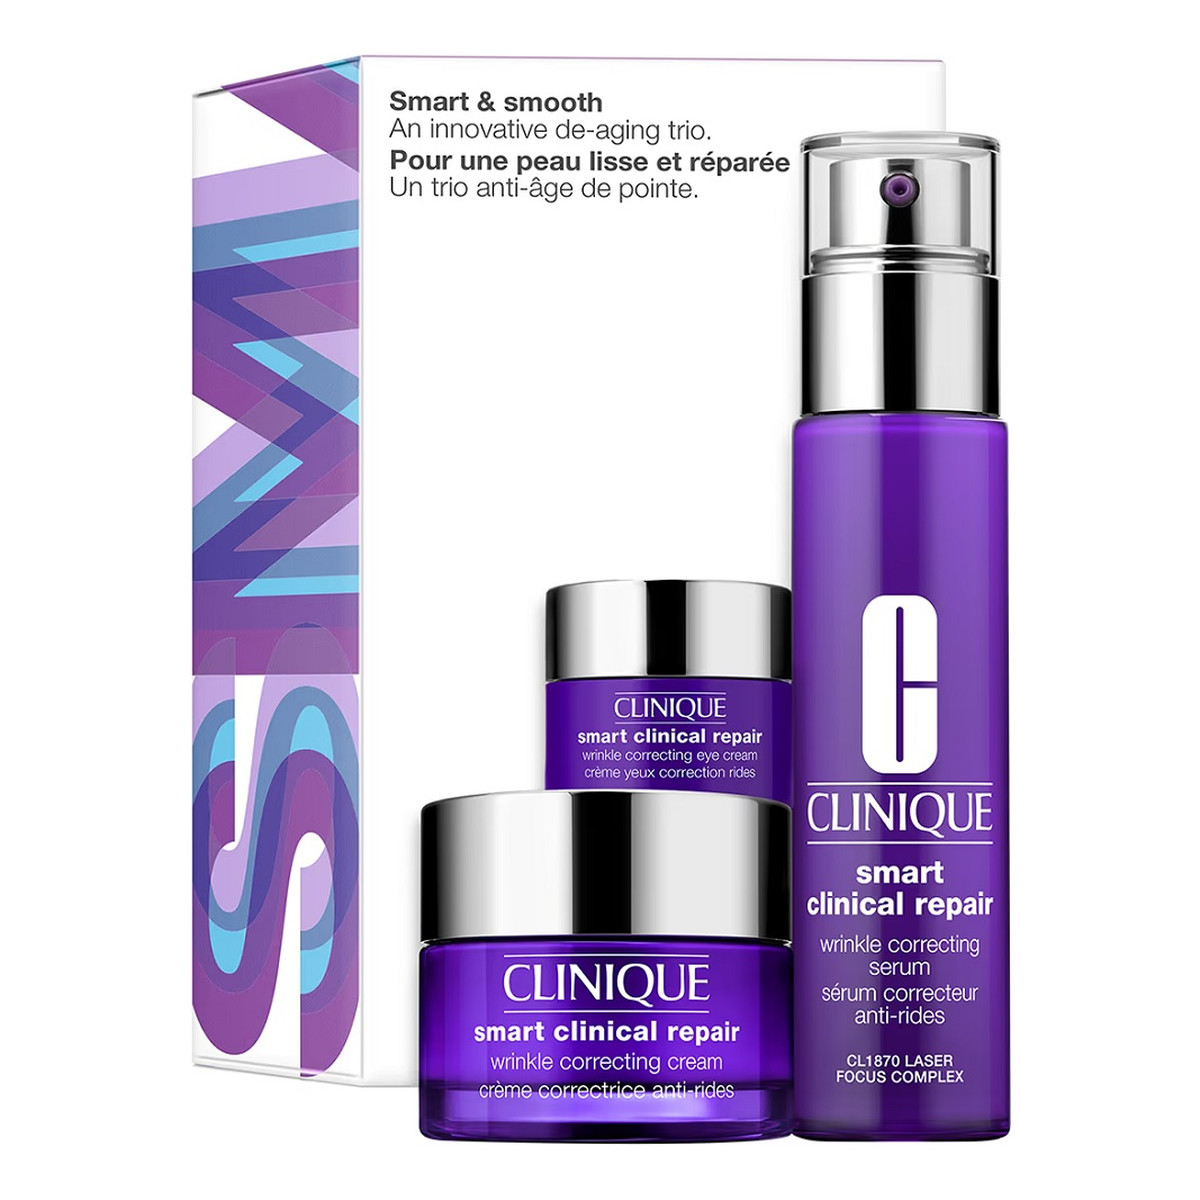 Clinique Smart & Smooth Zestaw smart clinical repair™ wrinkle correcting serum 30ml + smart clinical repair™ wrinkle correcting cream 15ml + smart clinical repair™ wrinkle correcting eye cream 5ml